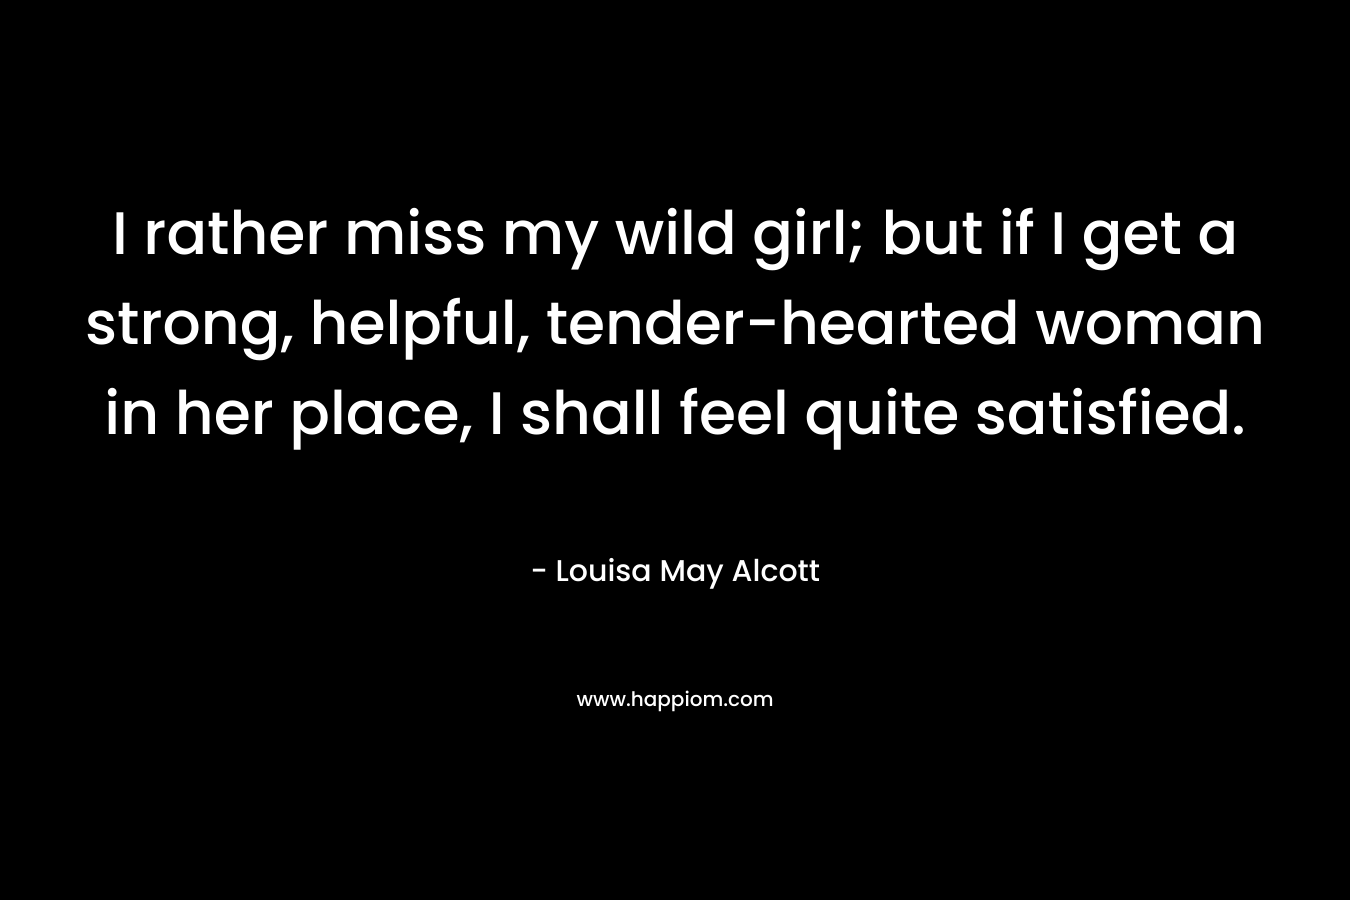 I rather miss my wild girl; but if I get a strong, helpful, tender-hearted woman in her place, I shall feel quite satisfied.